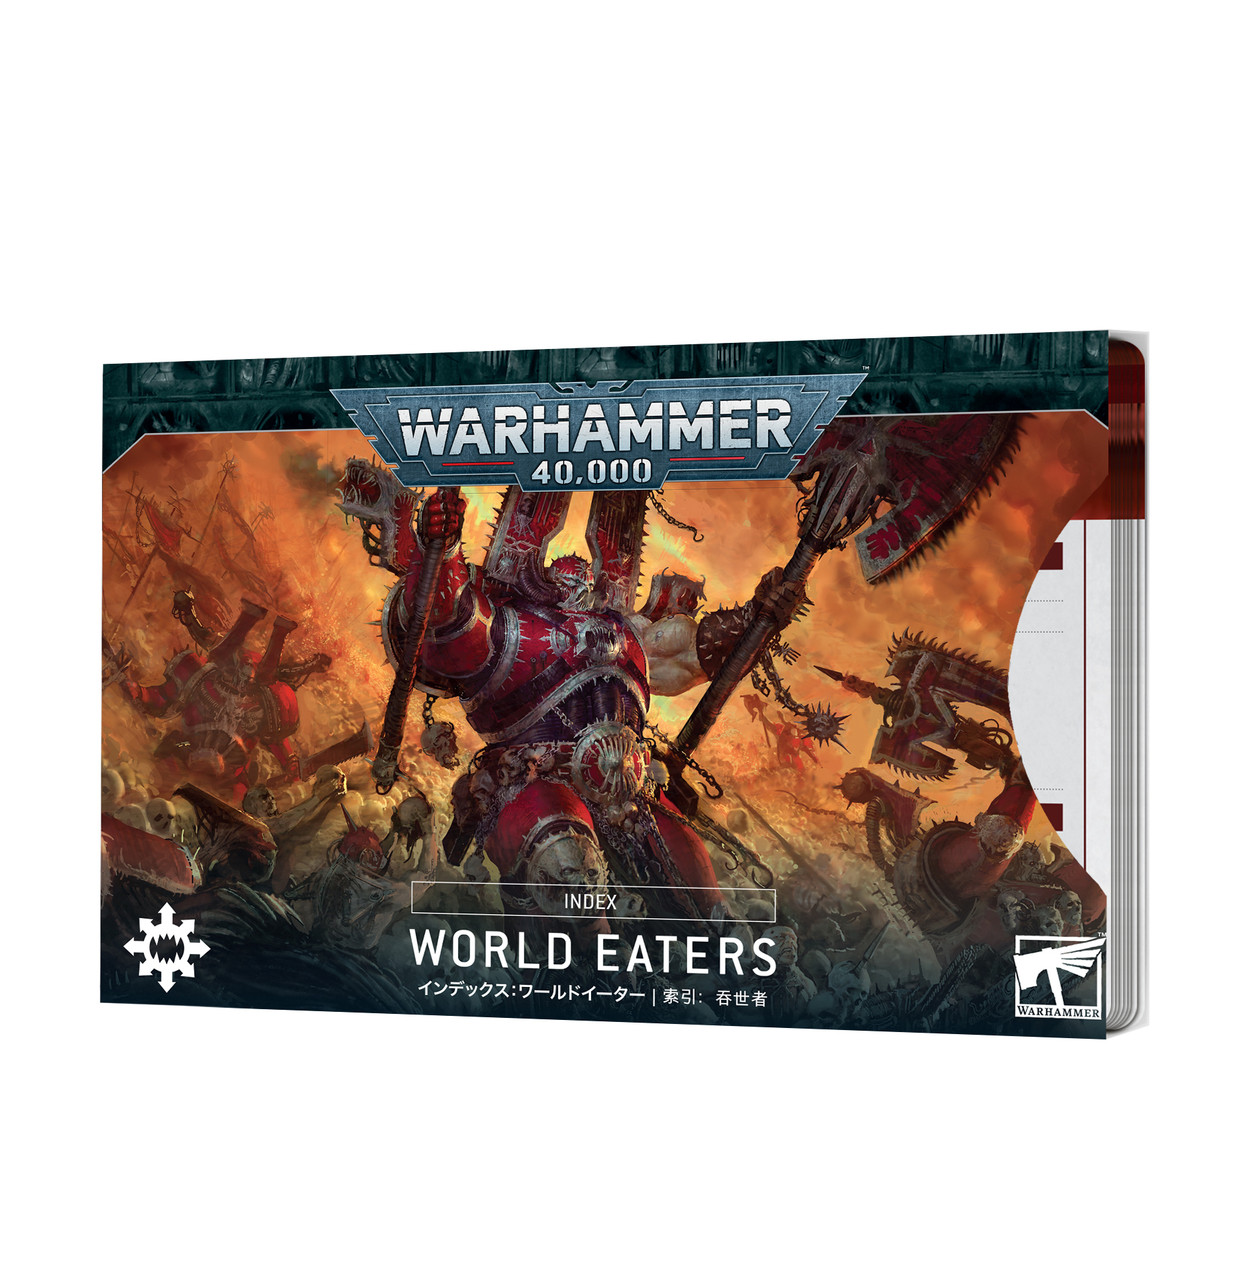 GW72-67 INDEX: WORLD EATERS